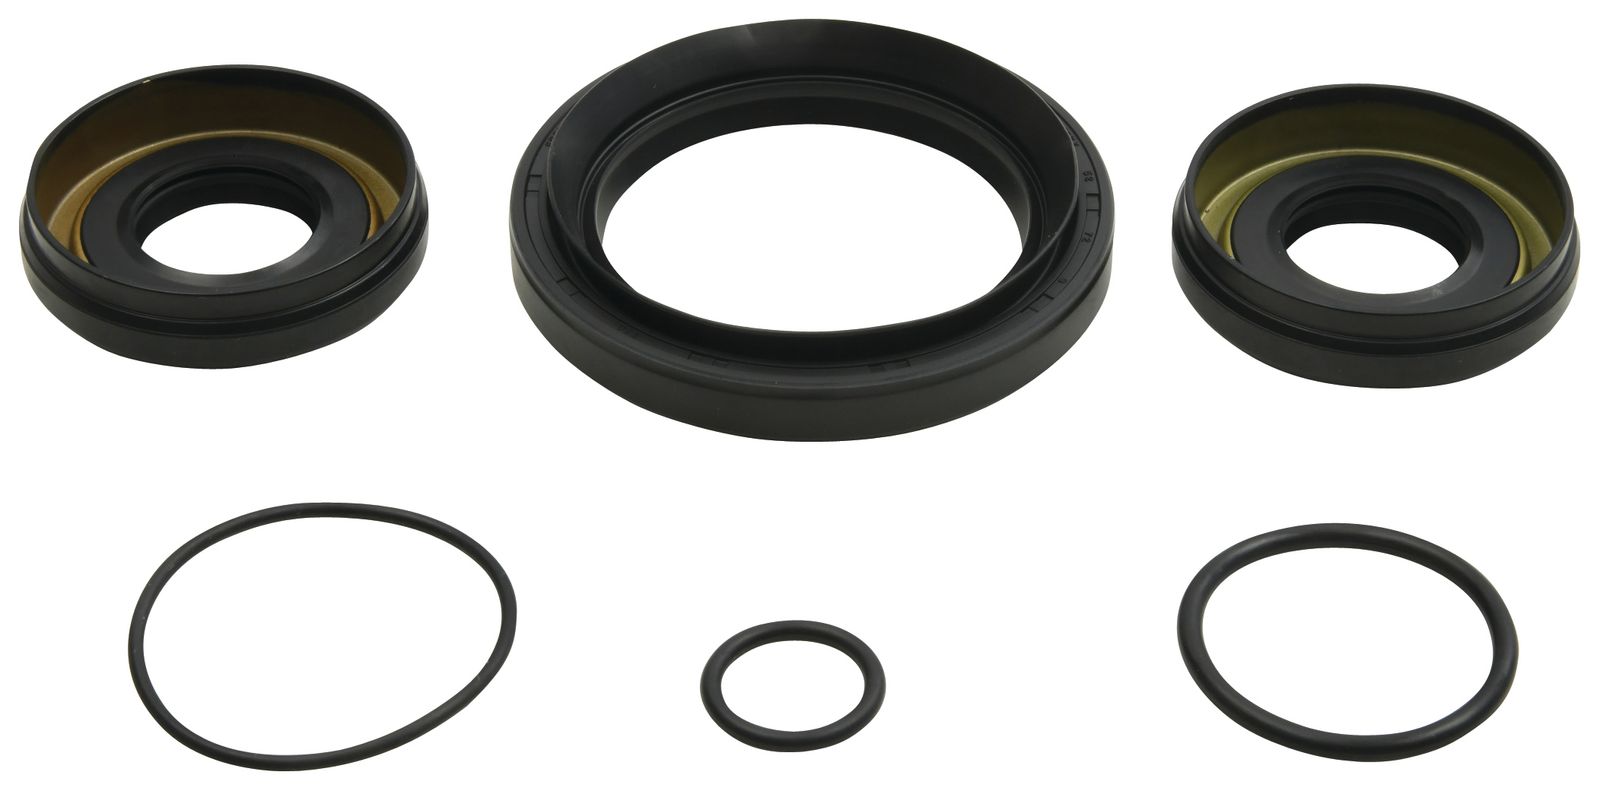 Wrp Diff Seal Kits - WRP252110-5 image